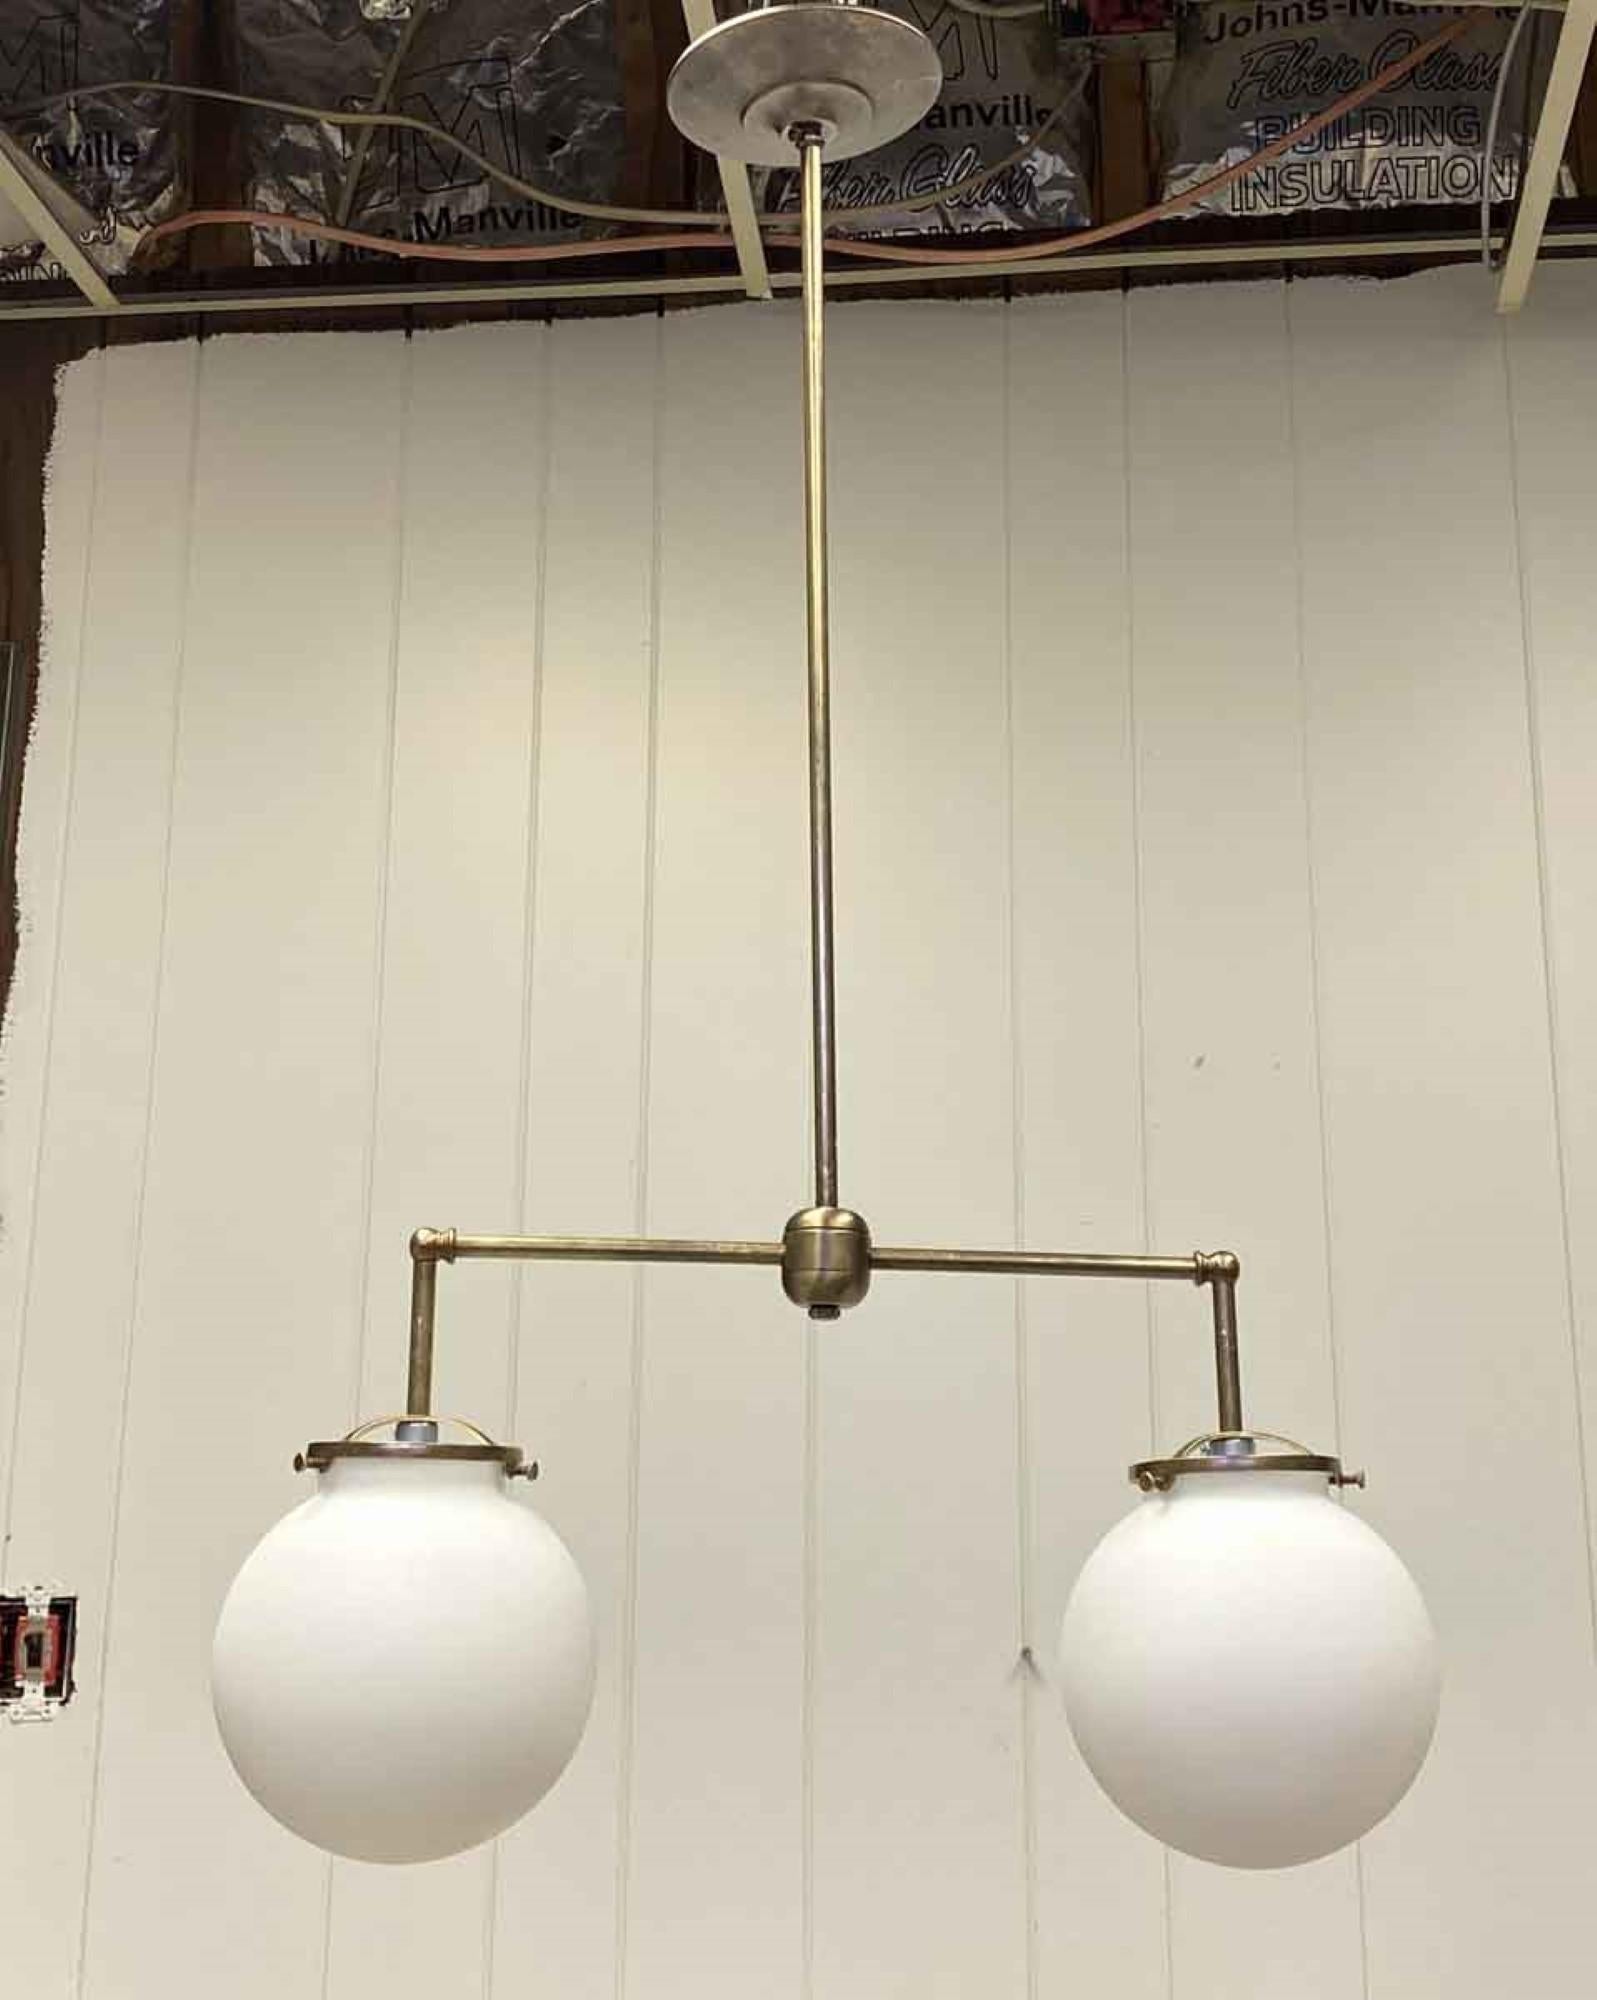 Antique two 6 inch opaline glass globes paired with newly made brass fitter. The height of pole can be adjusted upon request. Please note, this item is located in our Scranton, PA location.